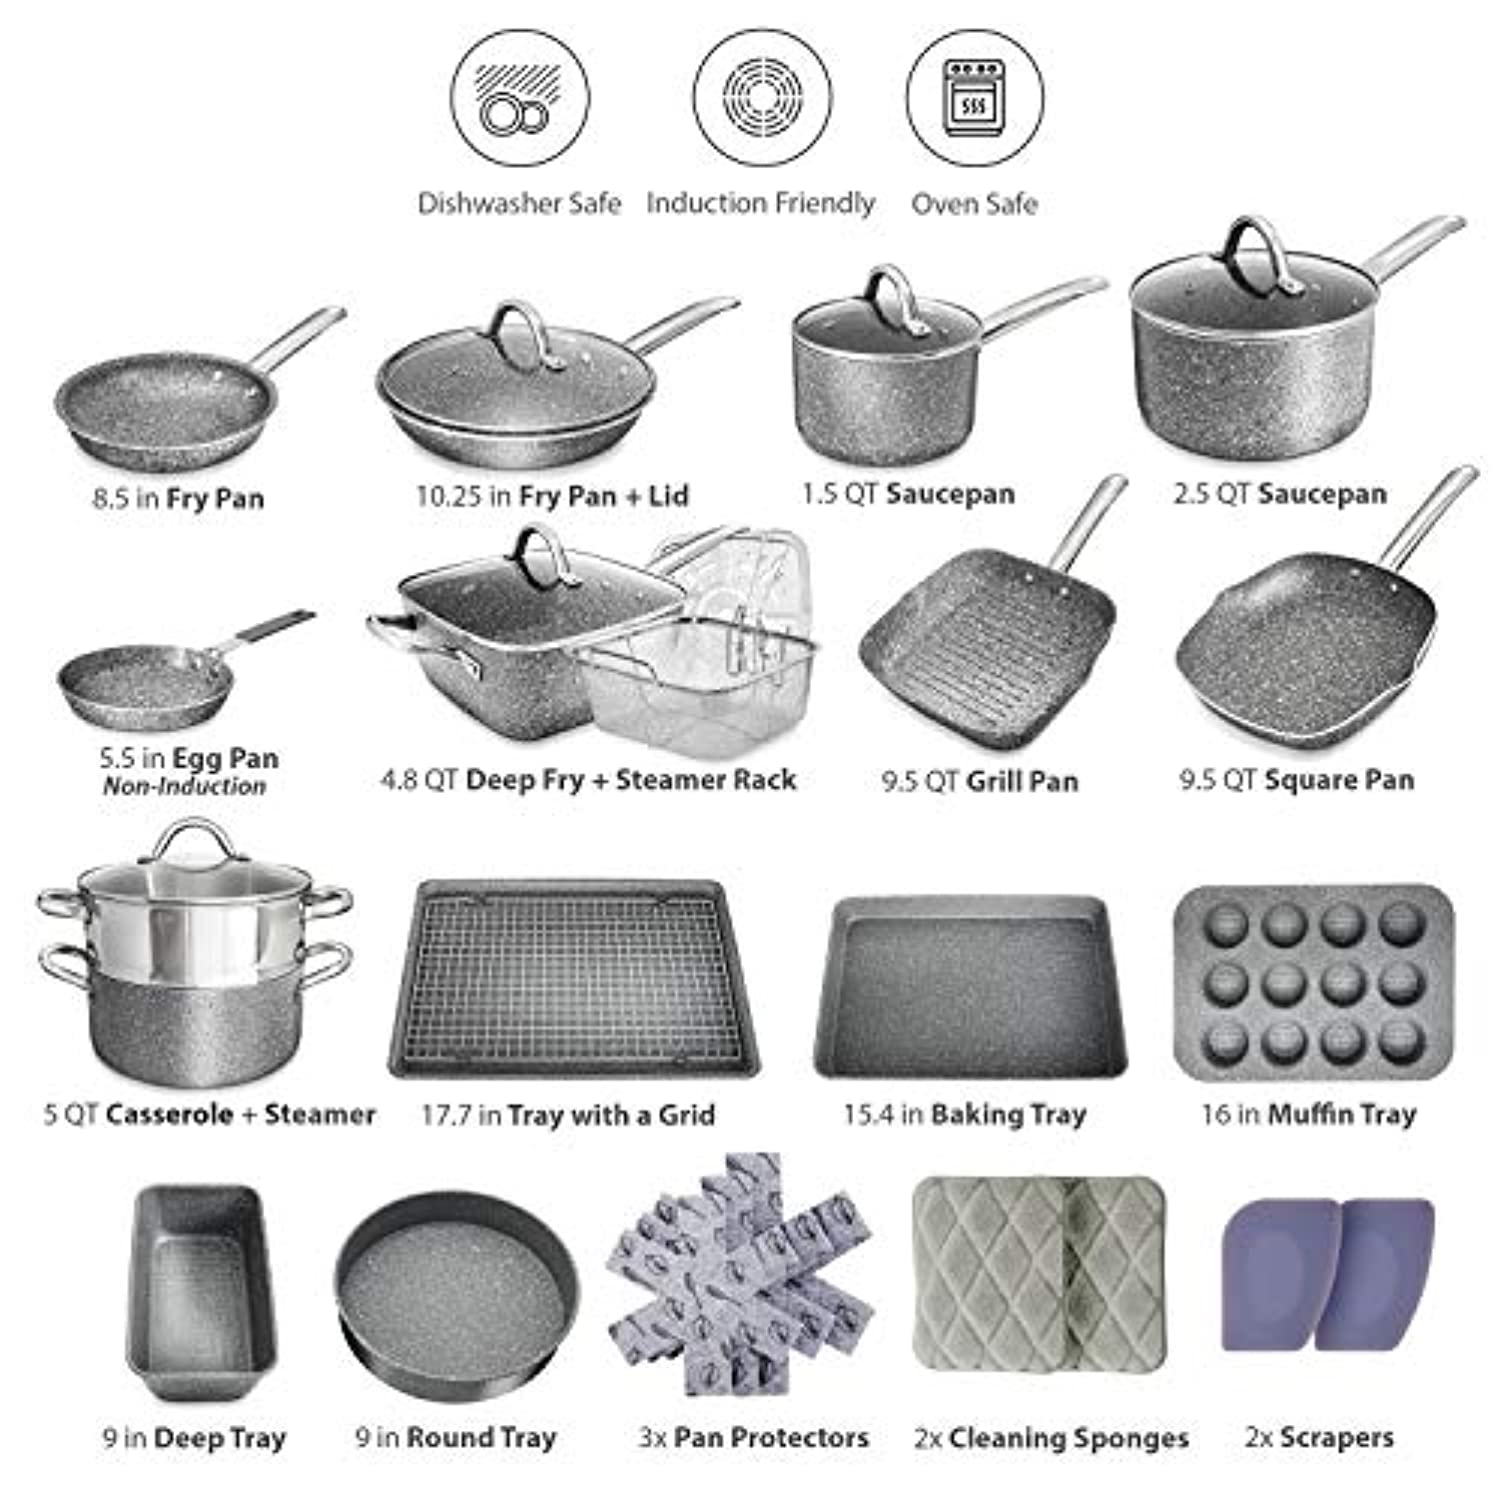 Dropship Nonstick Cookware Sets, 9 Pcs Granite Non Stick Pots And Pans Set  With Removable Handle to Sell Online at a Lower Price